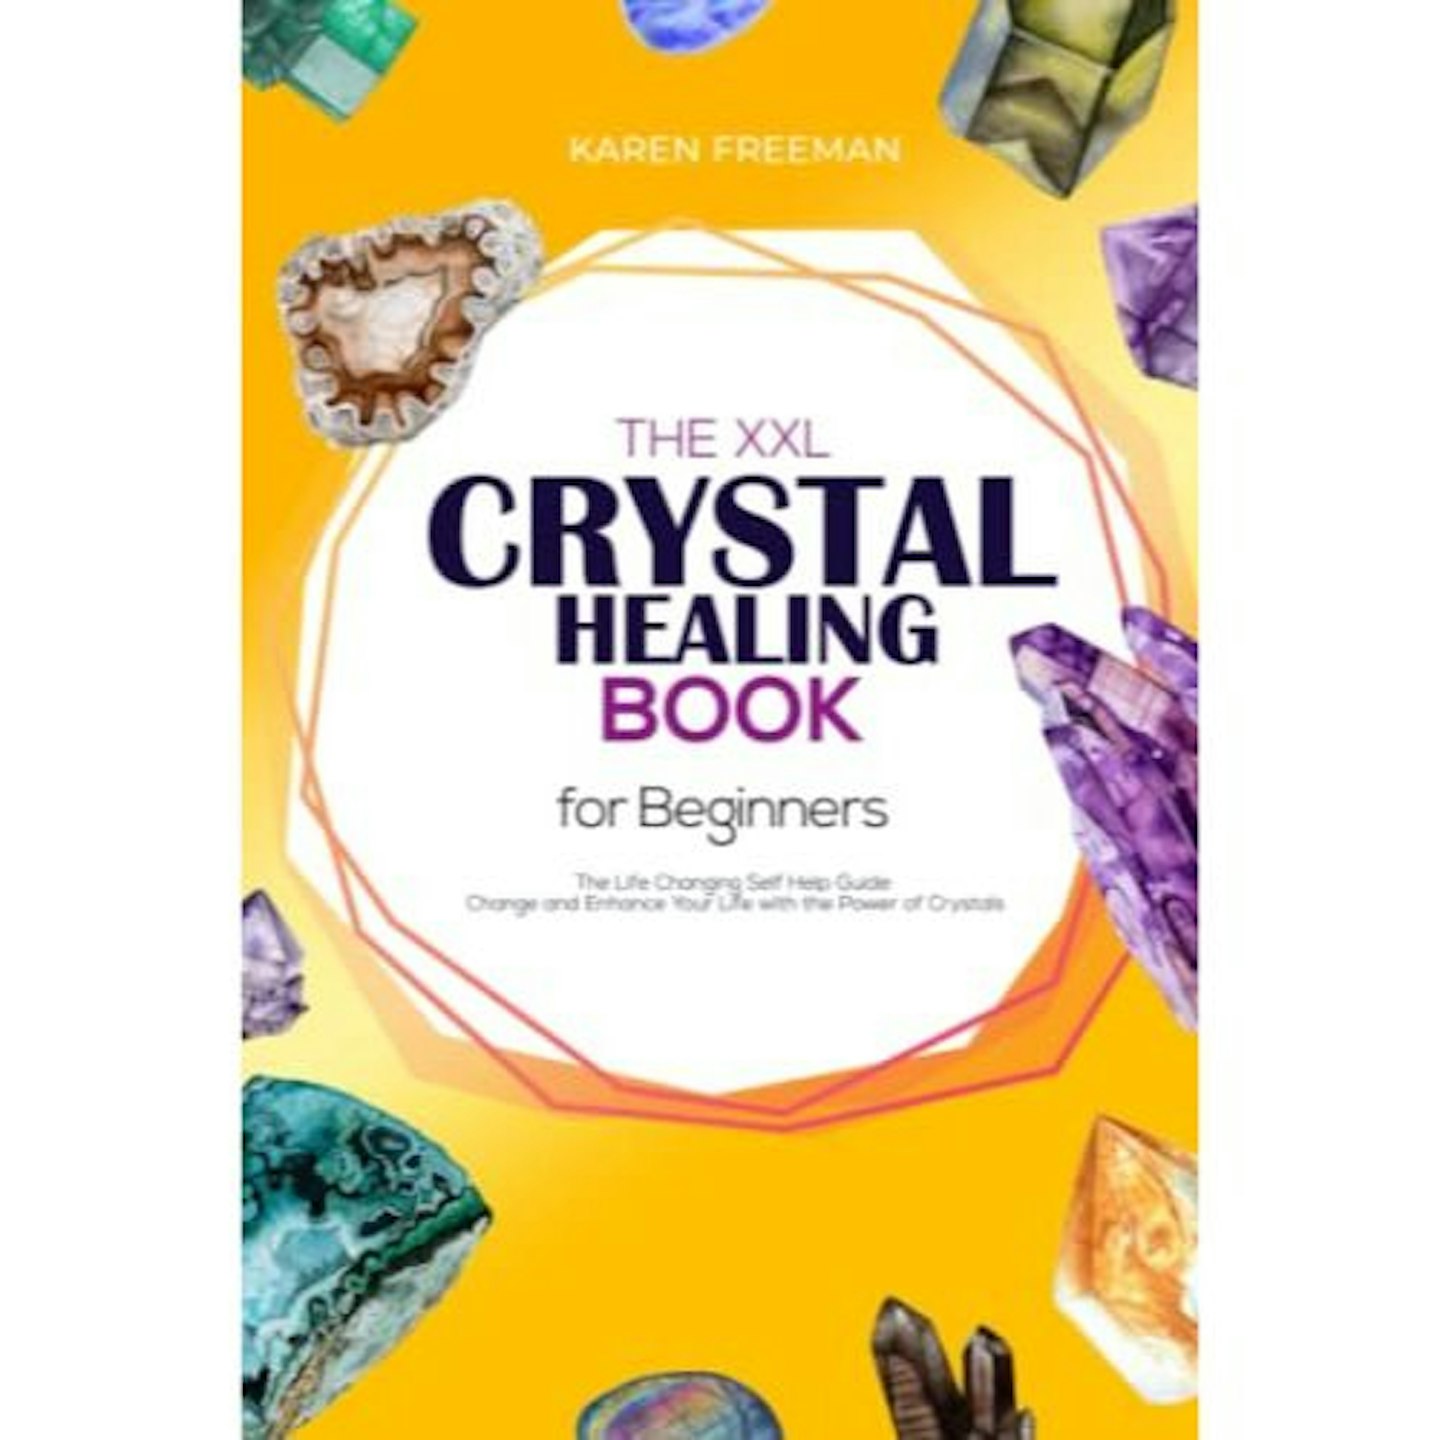 The XXL Crystal Healing Book For Beginners: The Life Changing Self Help Guide - Change and Enhance Your Life with the Power of Crystals